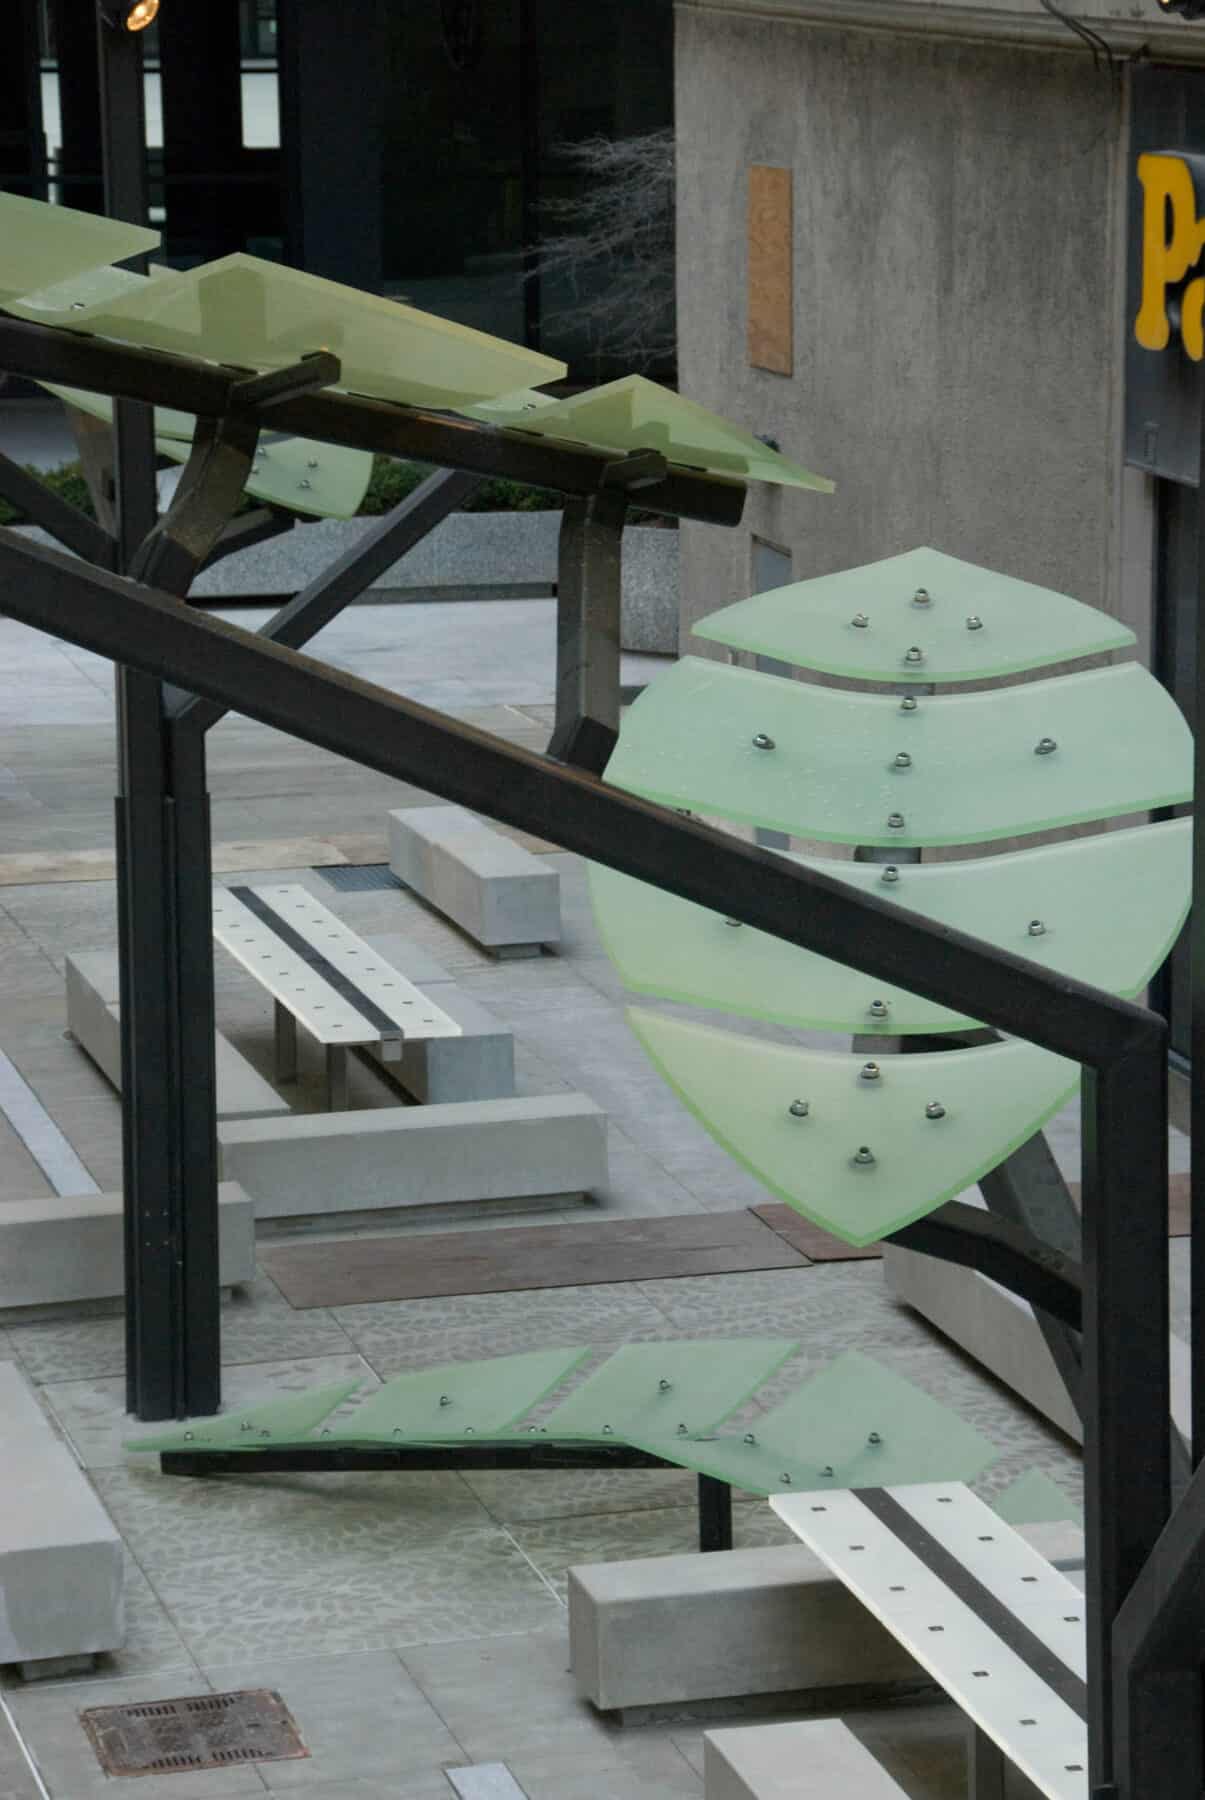 Custom Fabrication of Architectural Metal Tree with Acrylic Leaves from Construction Specialty Projects by Commercial Builder & General Contractor Structural Enterprises